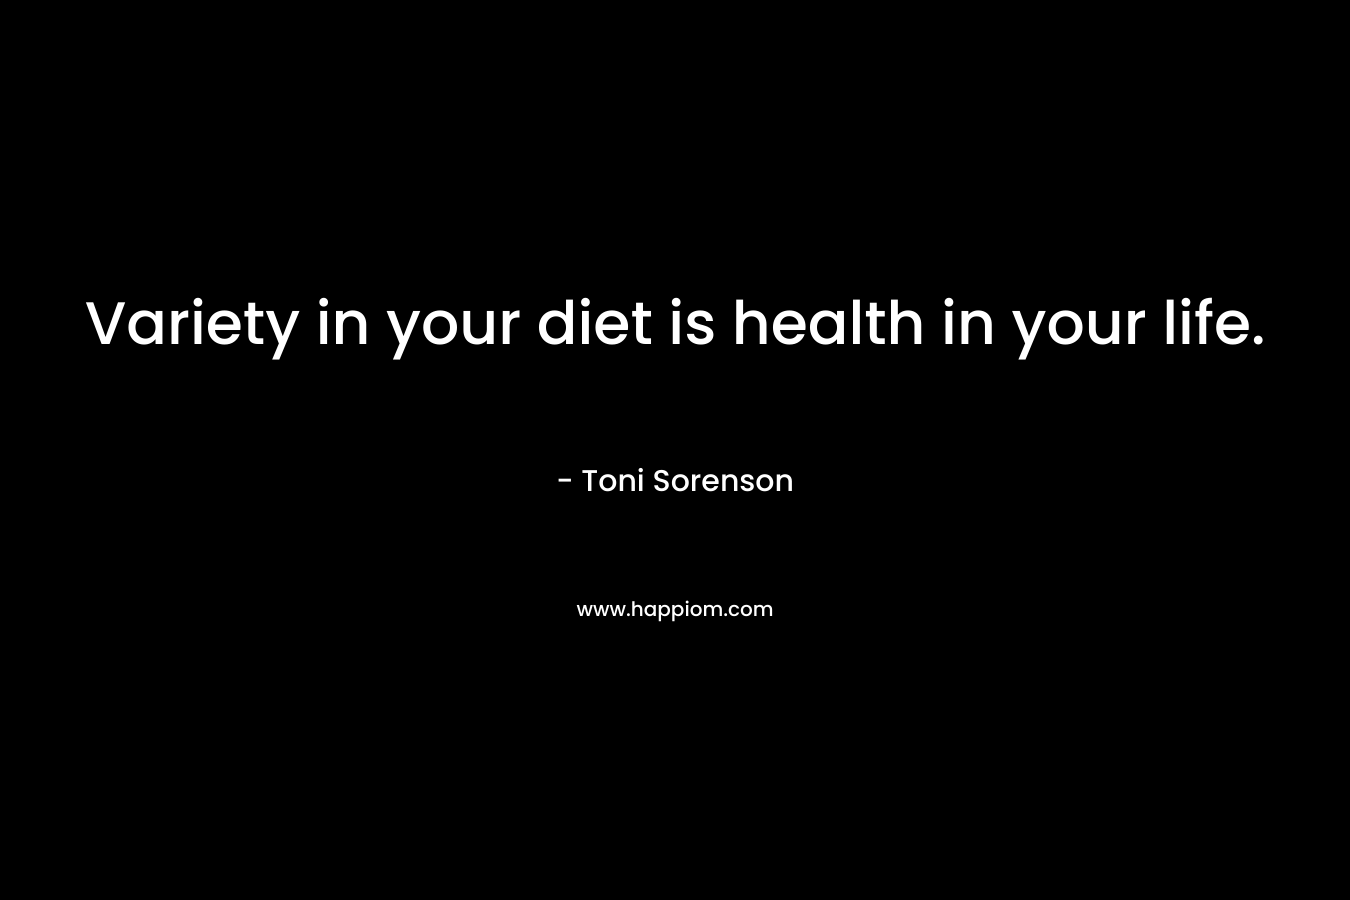 Variety in your diet is health in your life. – Toni Sorenson